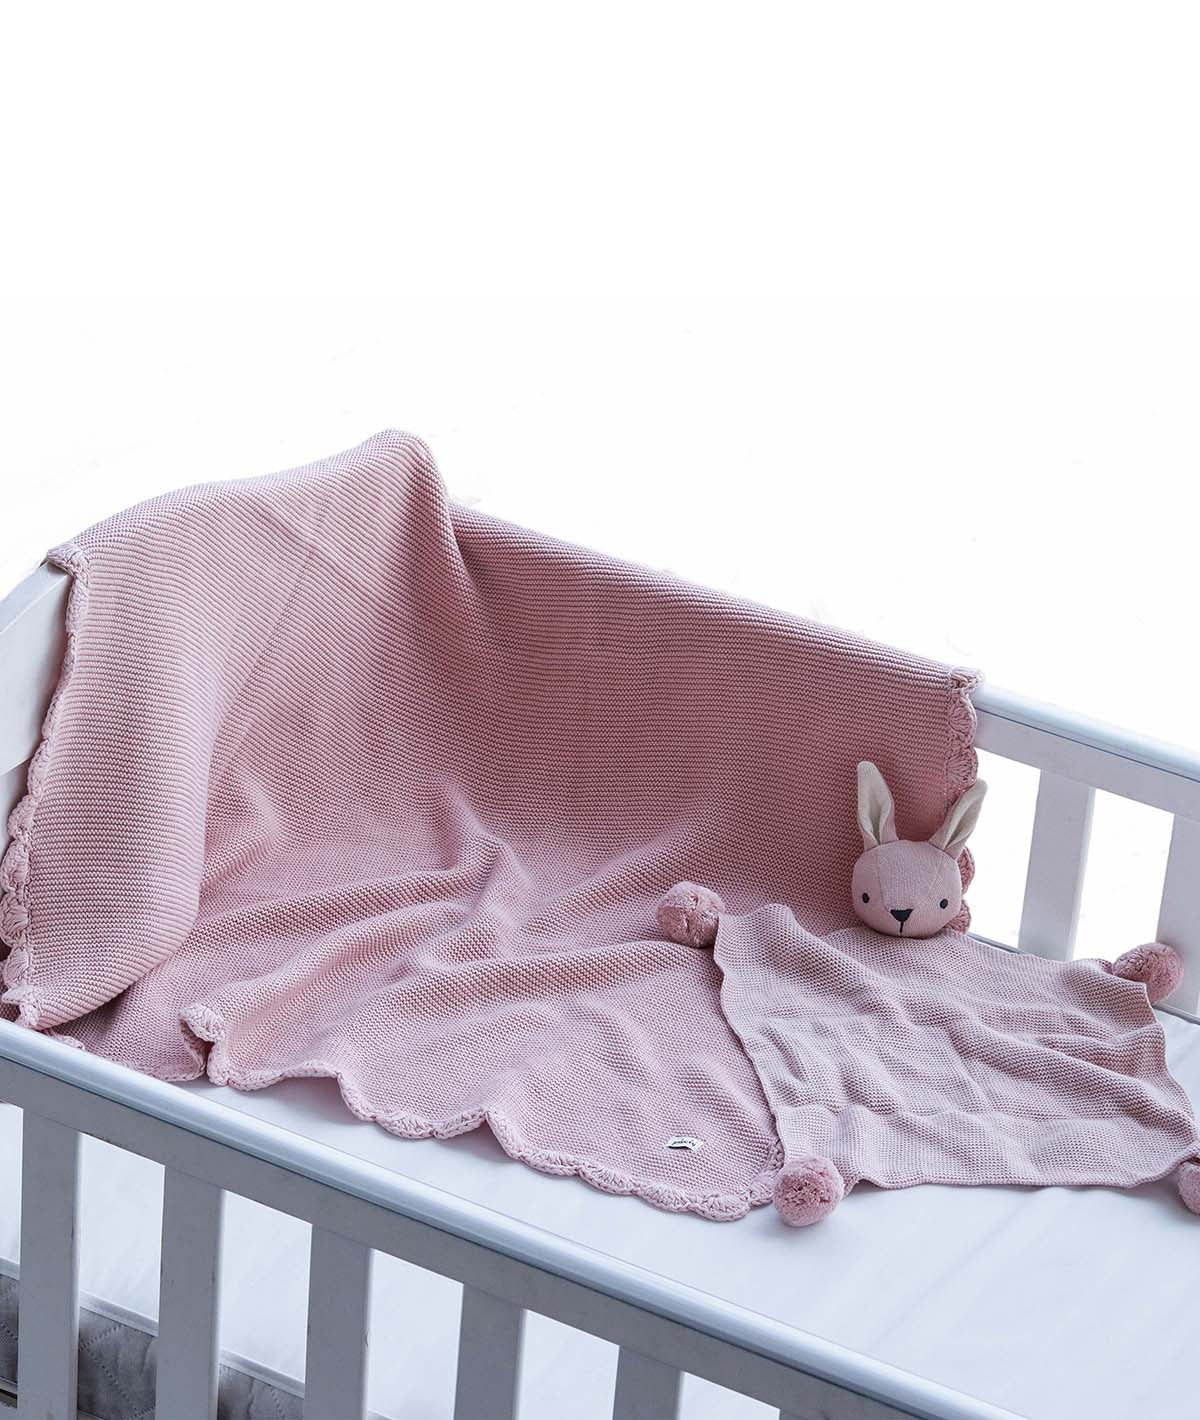 Cotton Baby ac Blankets